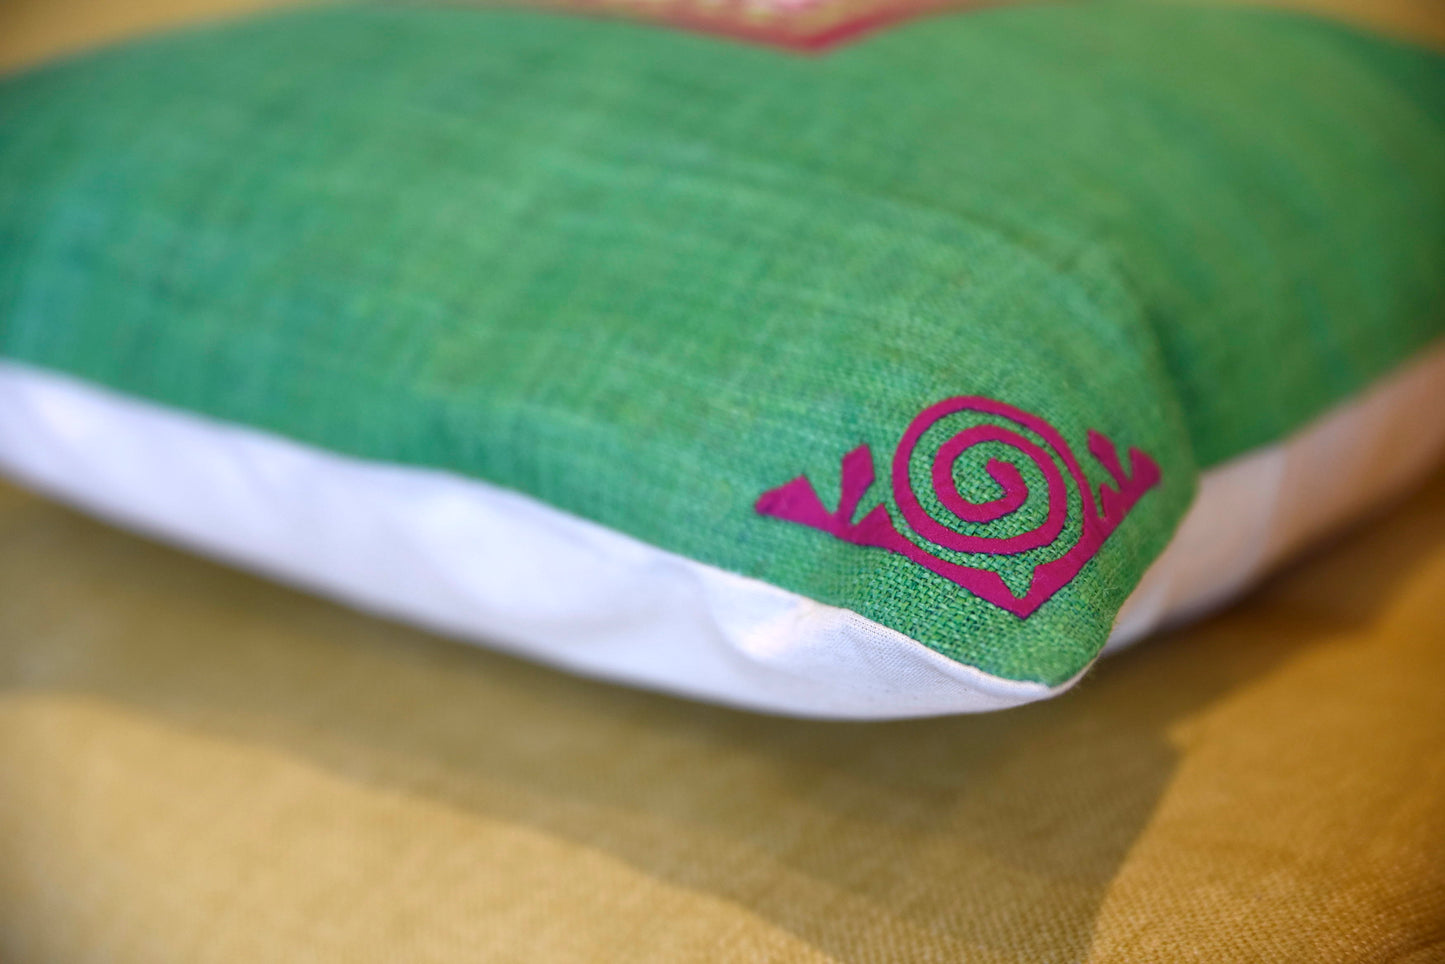 Green Cushion Cover (45x45 cm), embroidered corners, white patch on pink background